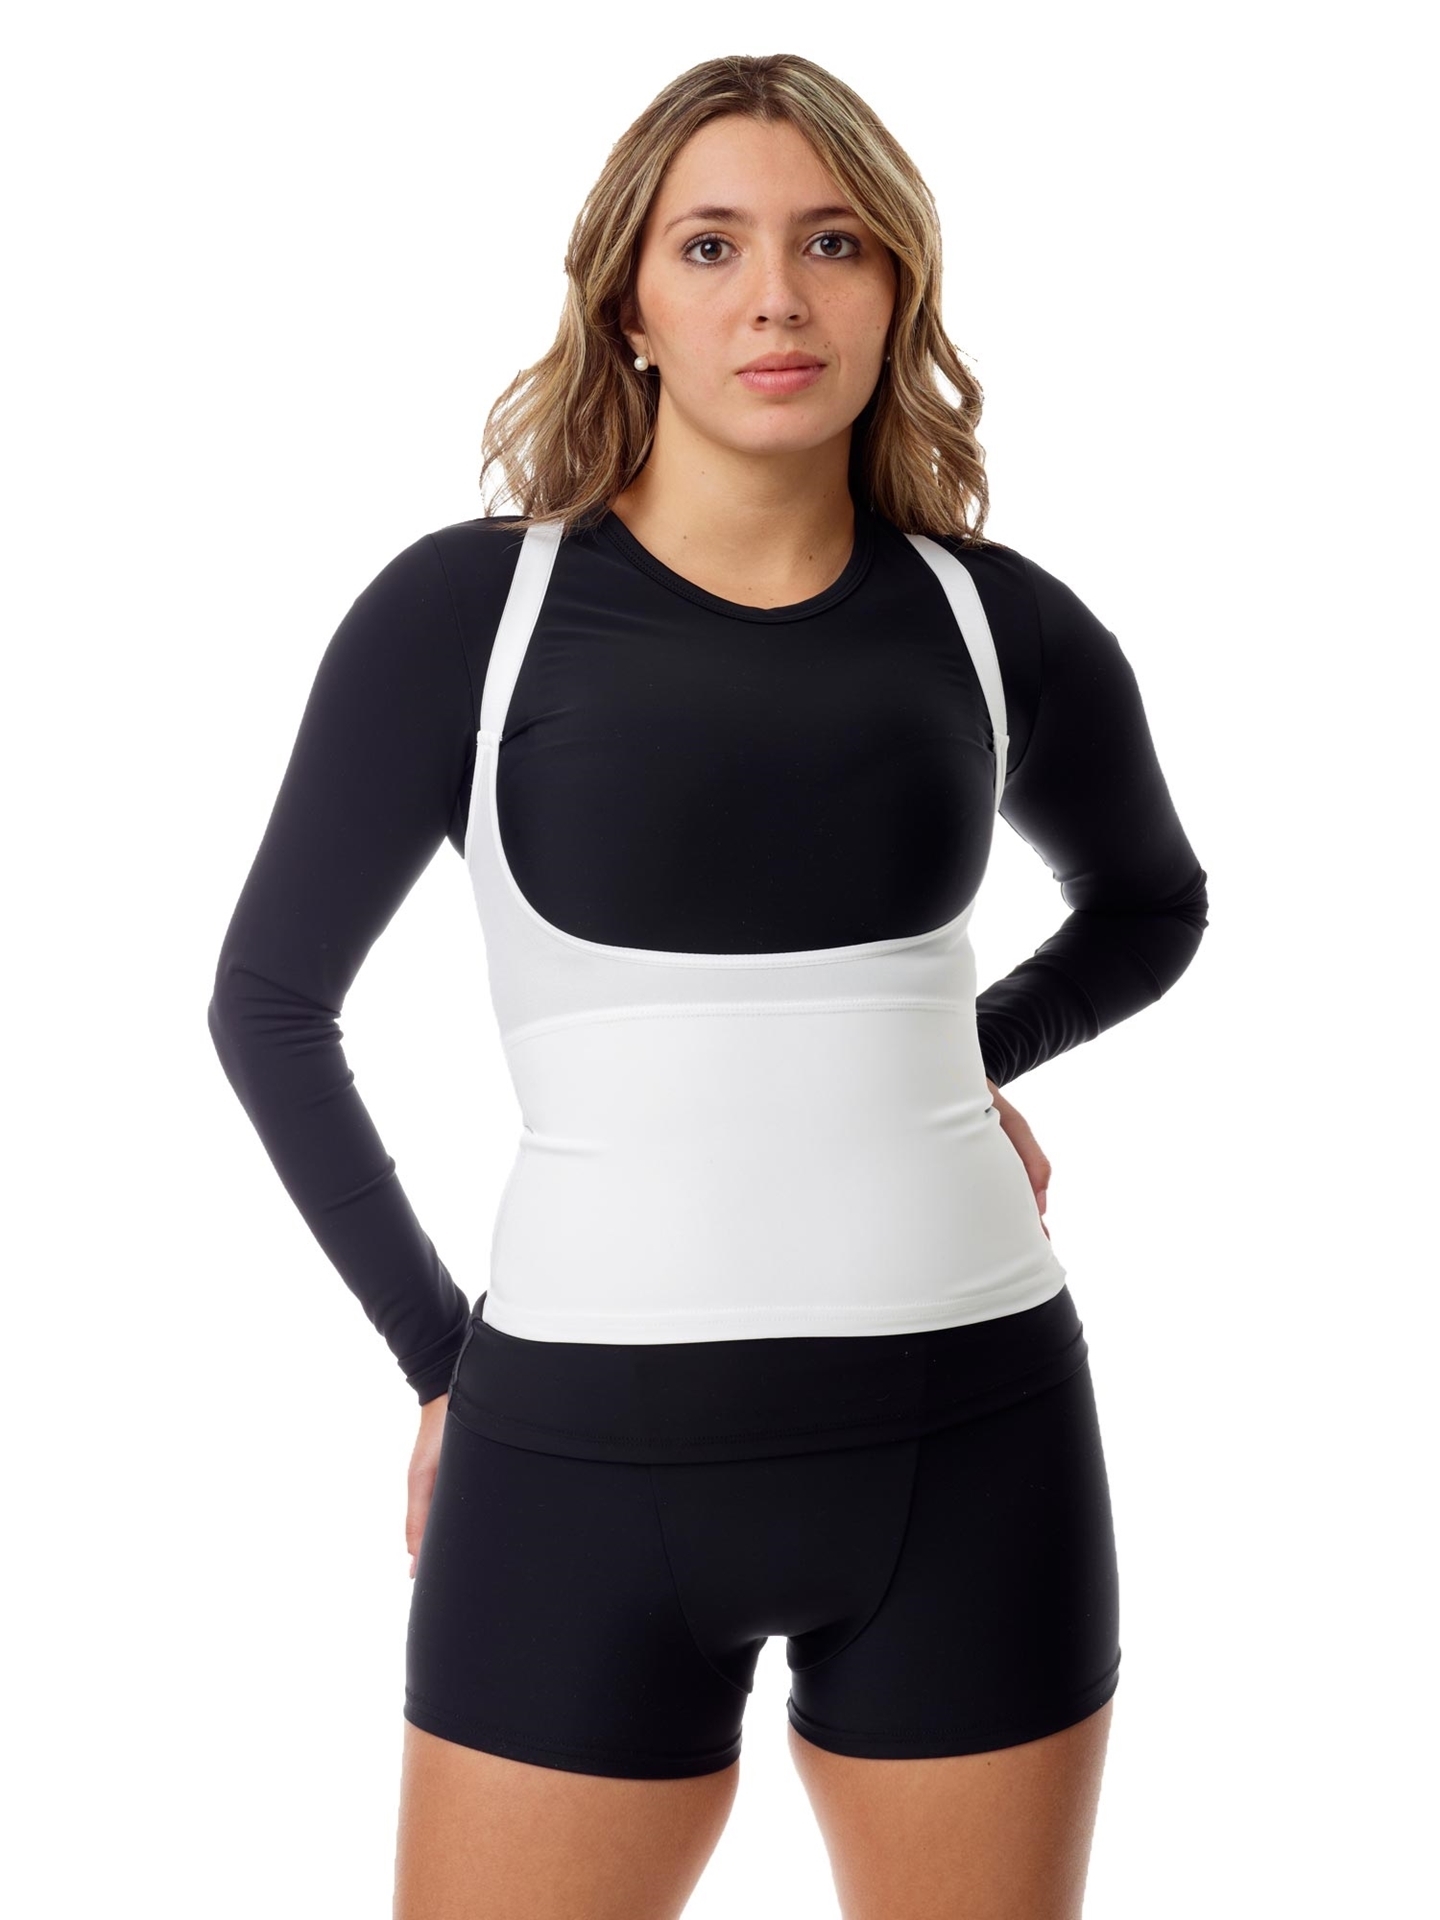 Women's White Shapewear Tank Top With Padded Chest & Waist Cincher